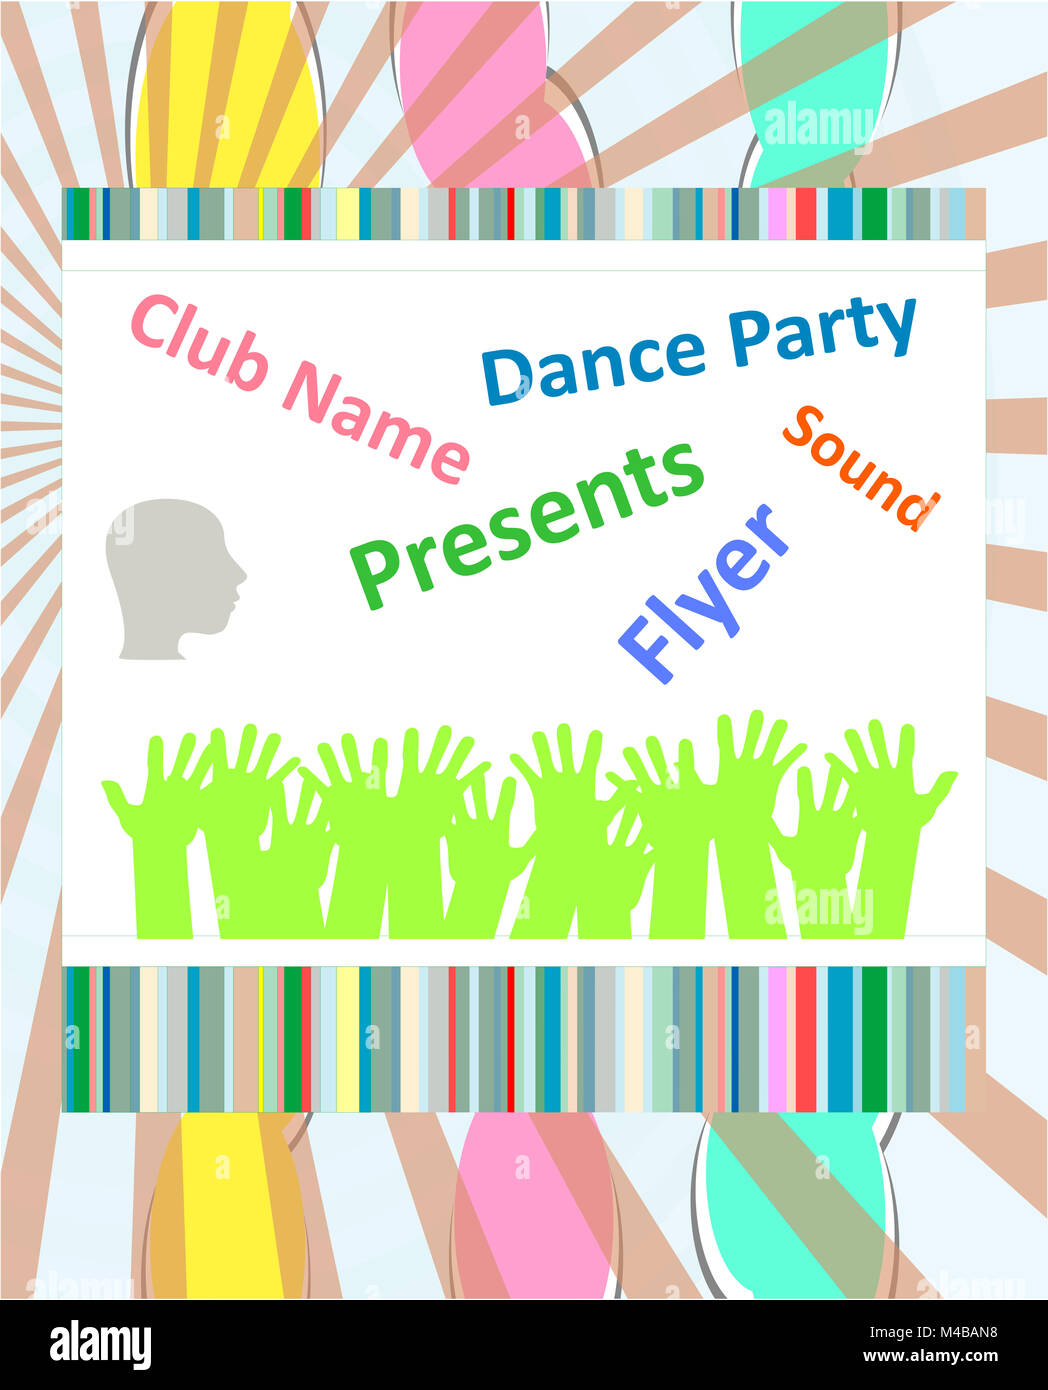 Vertical blue music party background with graphic elements and text. Stock Photo